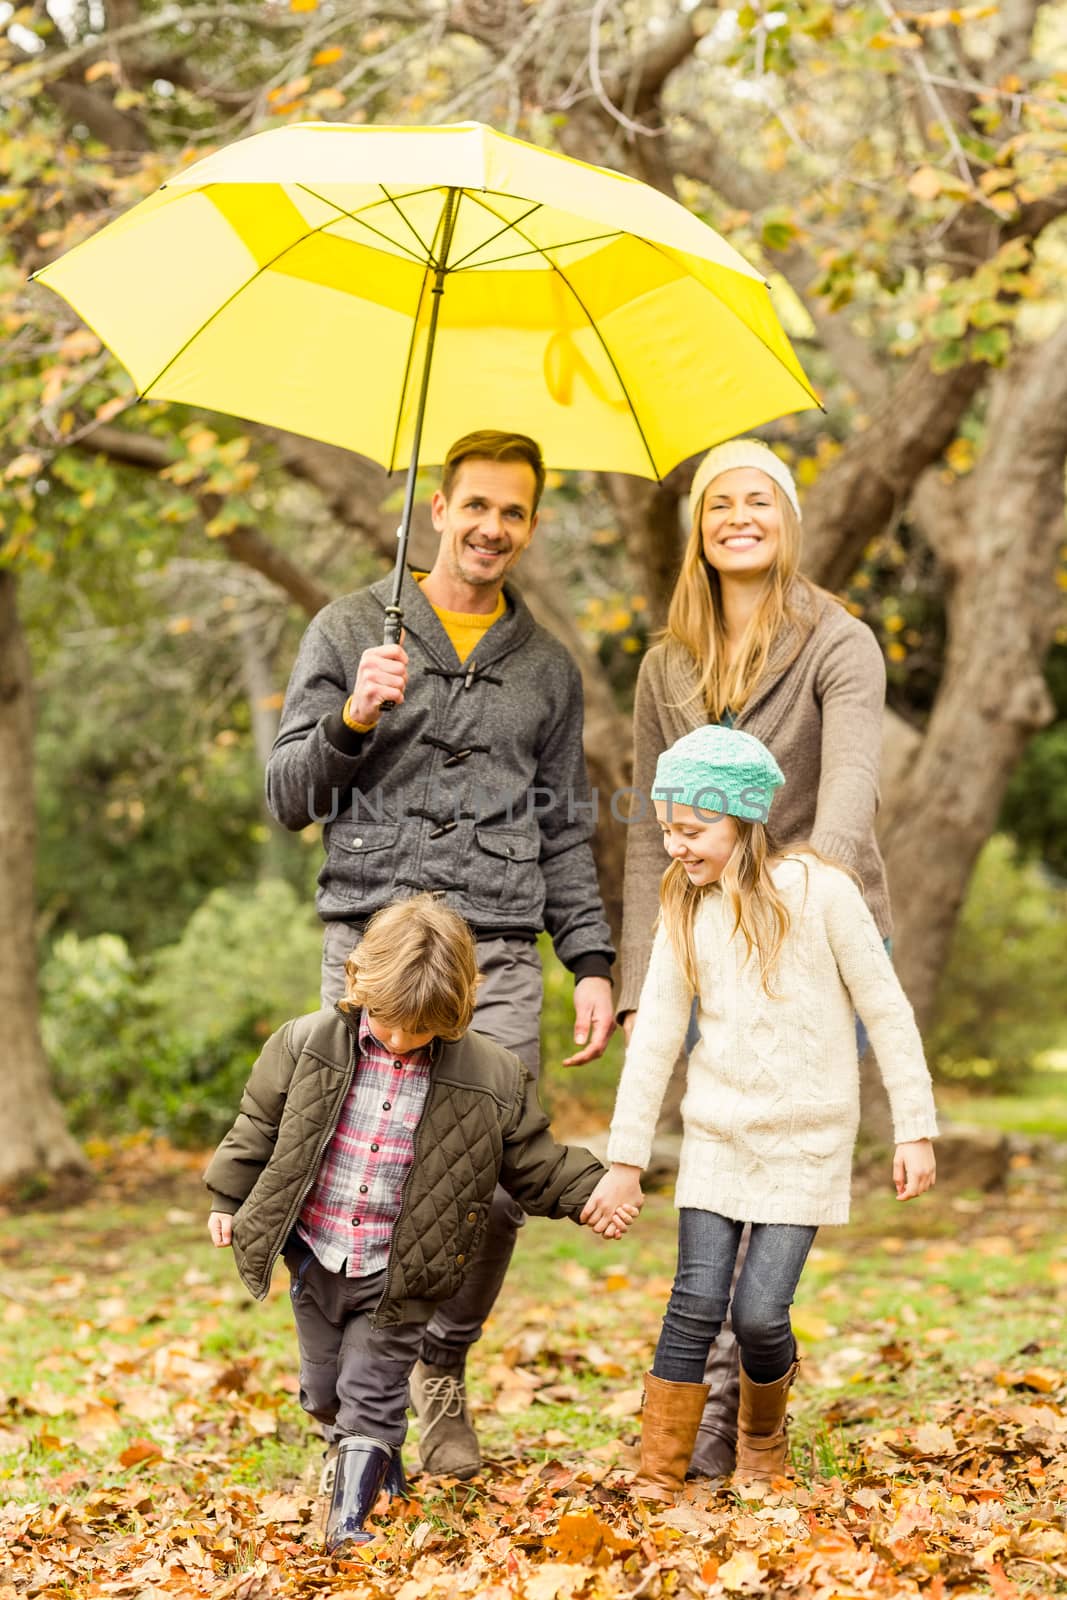 Smiling young family under umbrella on an autumns day